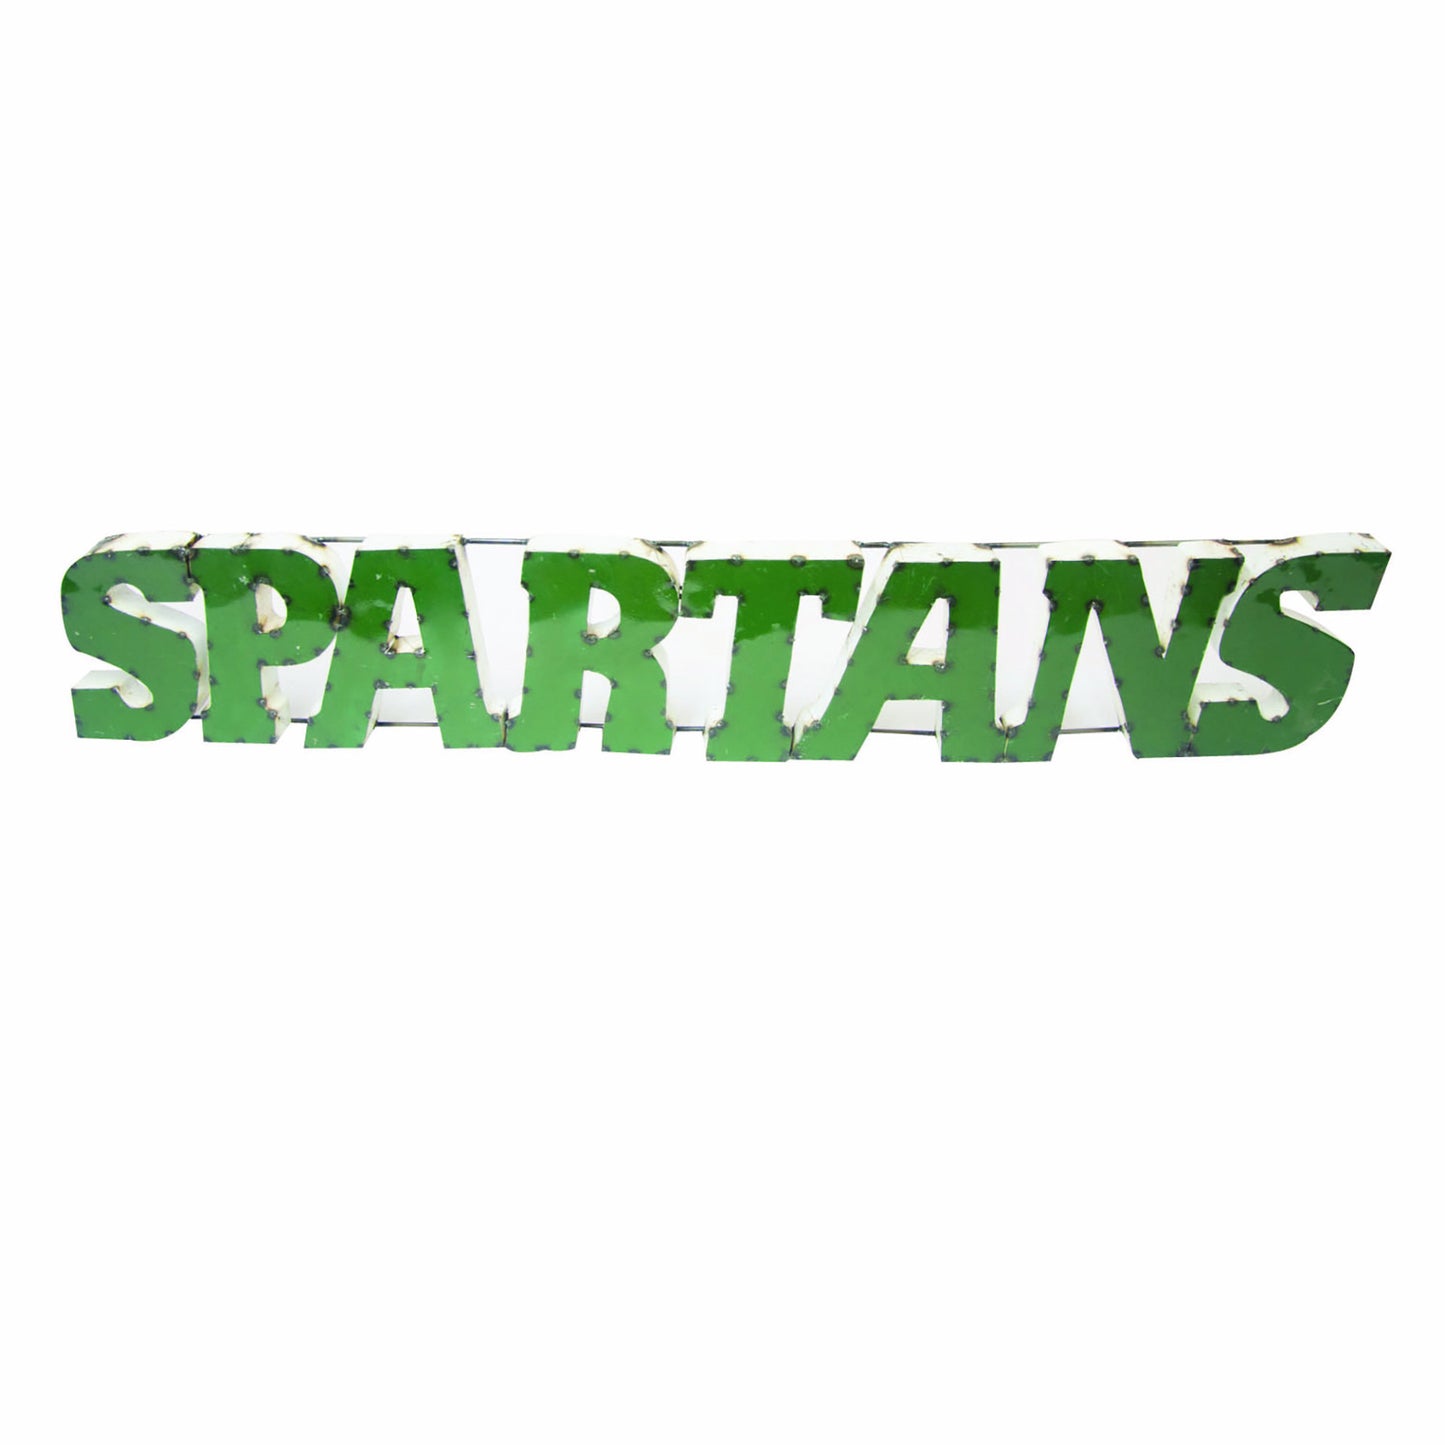 Michigan State "Spartans" Recycled Metal Wall Decor